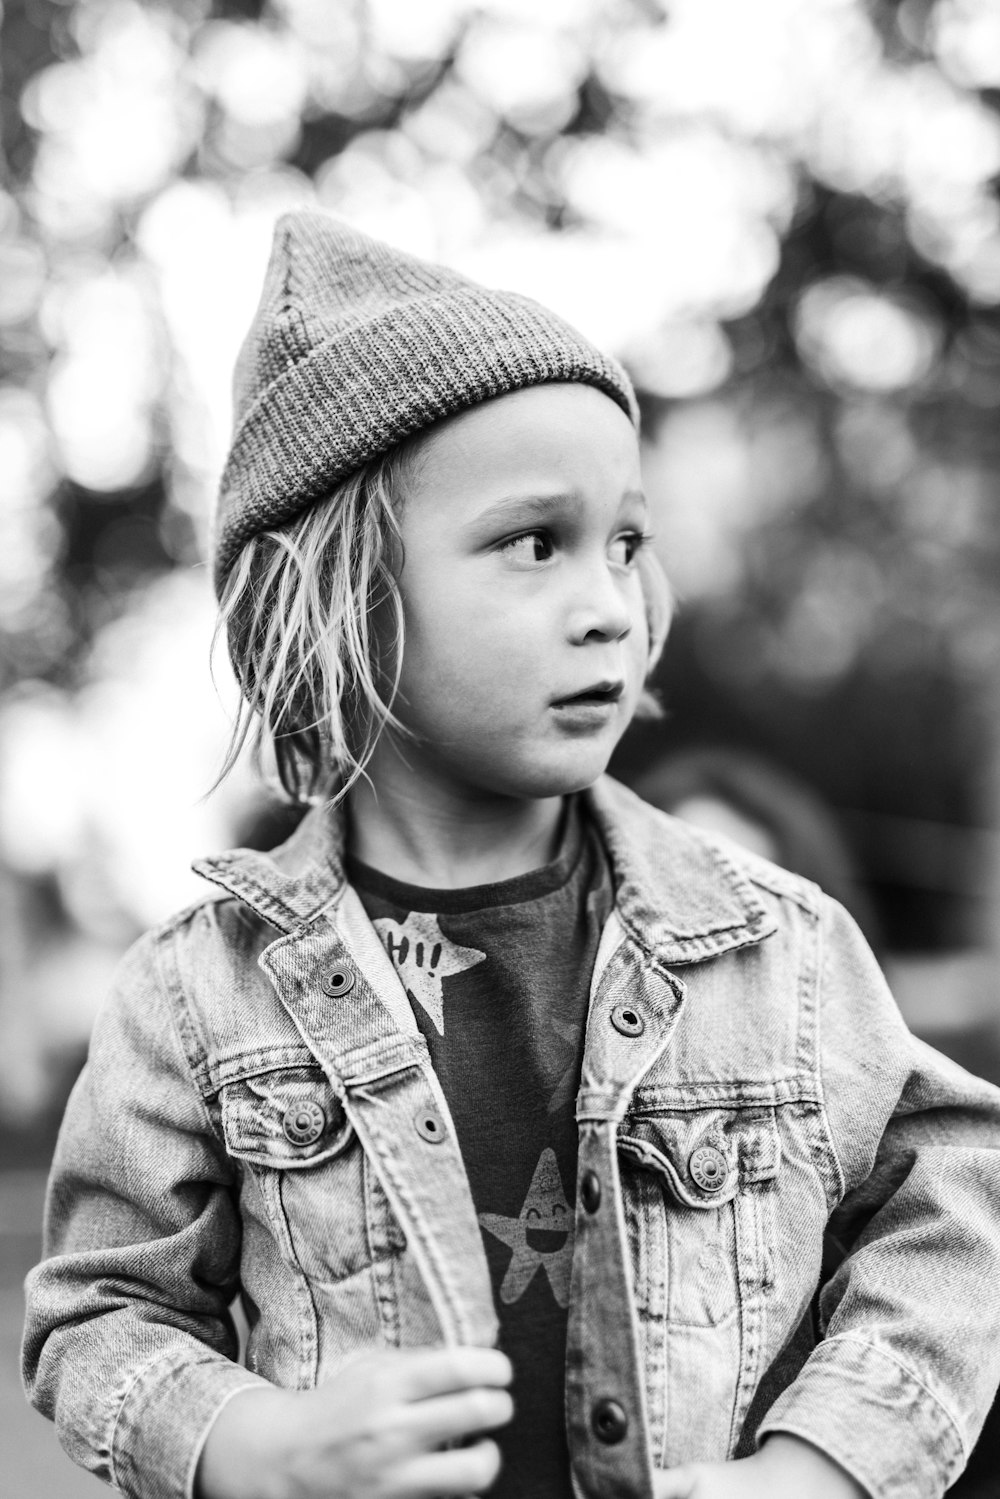 grayscale photo of girl in knit cap and jacket